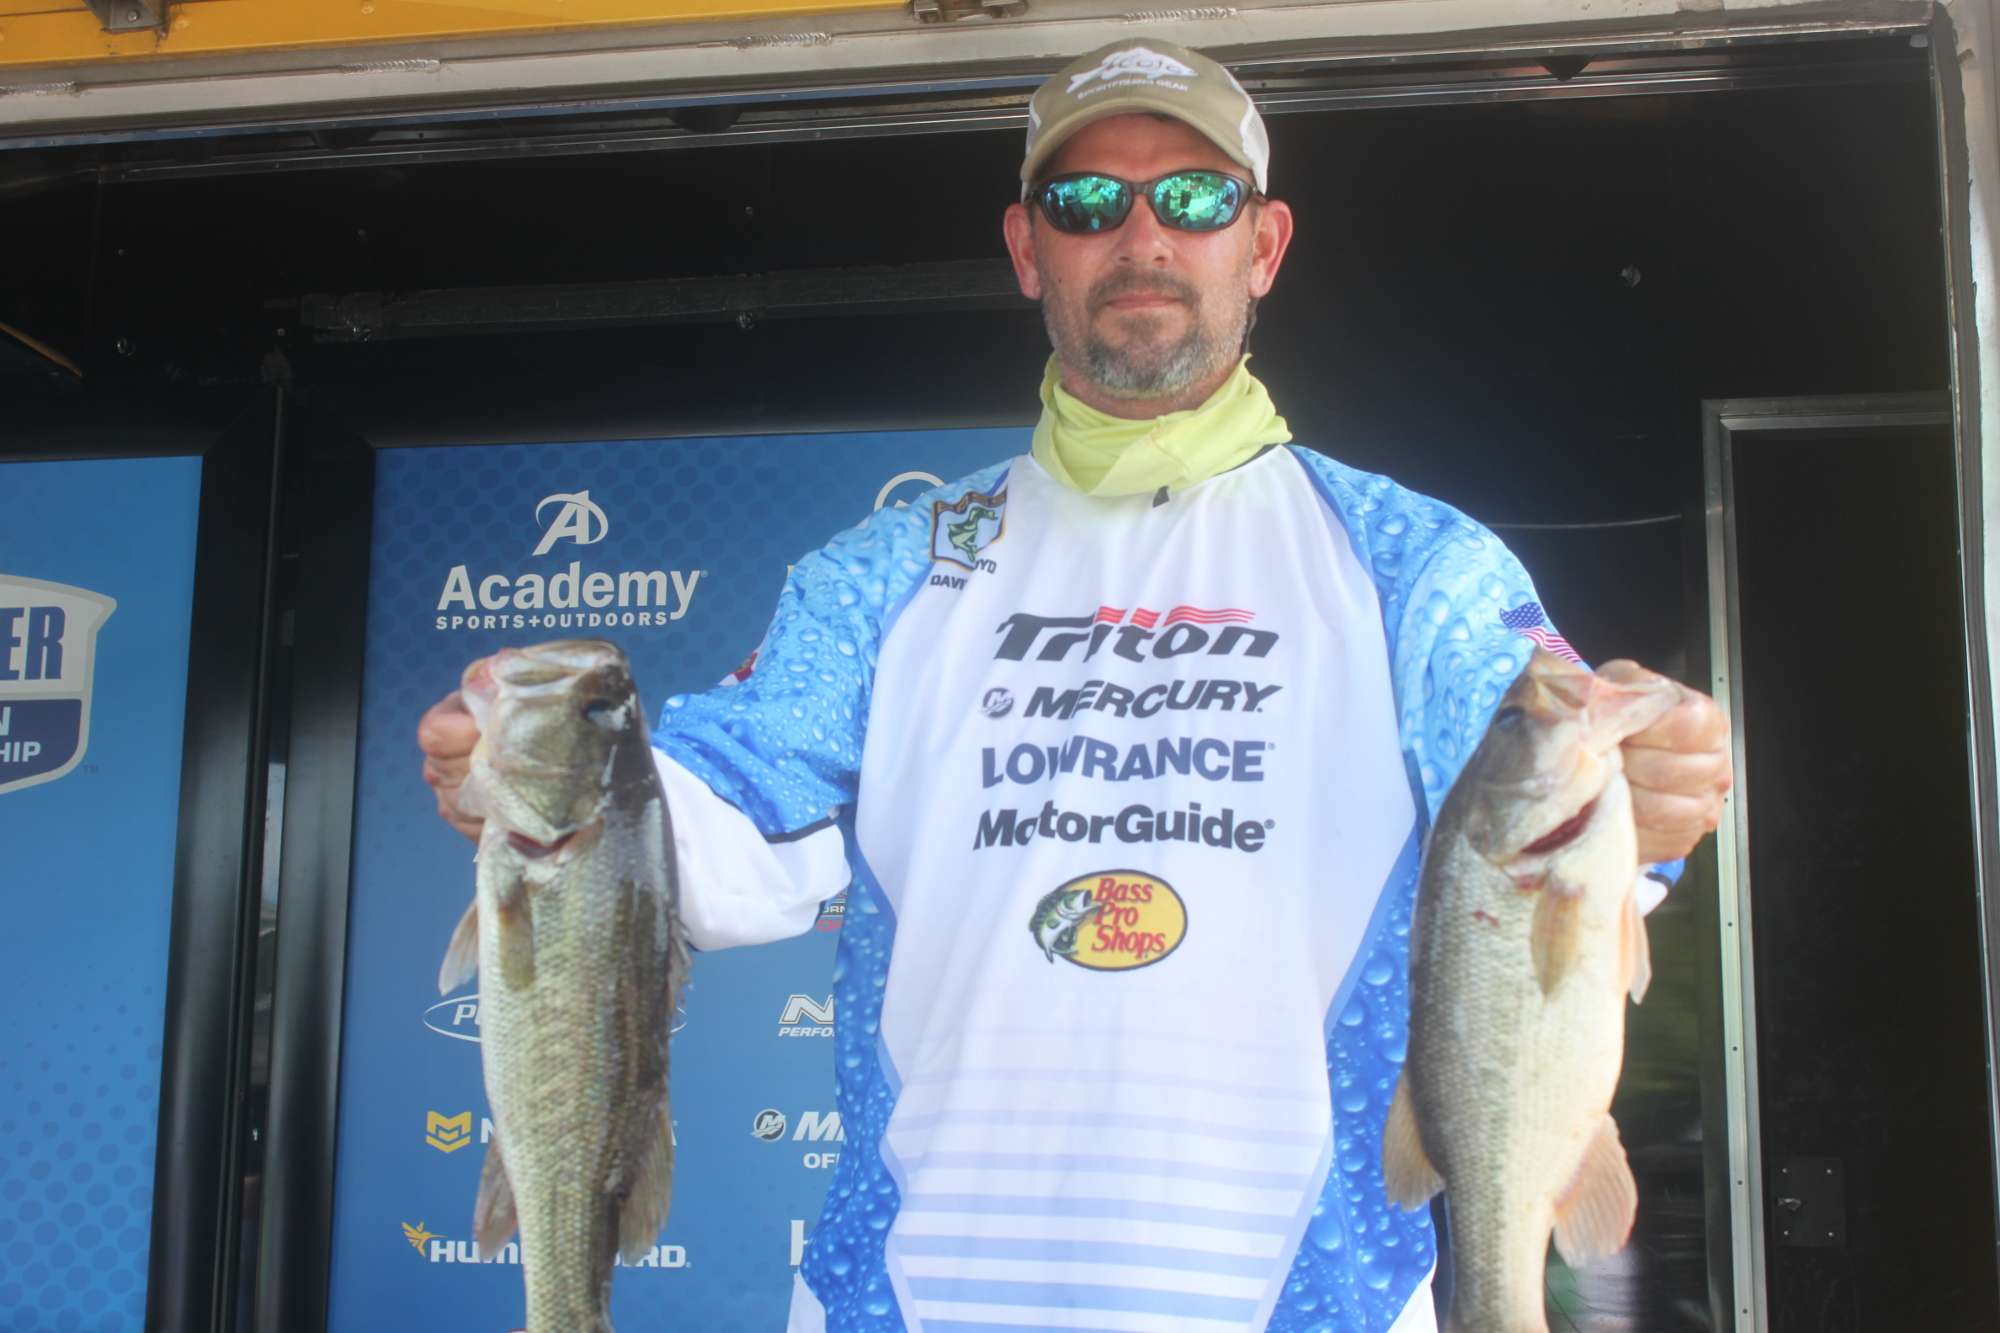 David Boyd of Florida is third among boaters with 19-10.